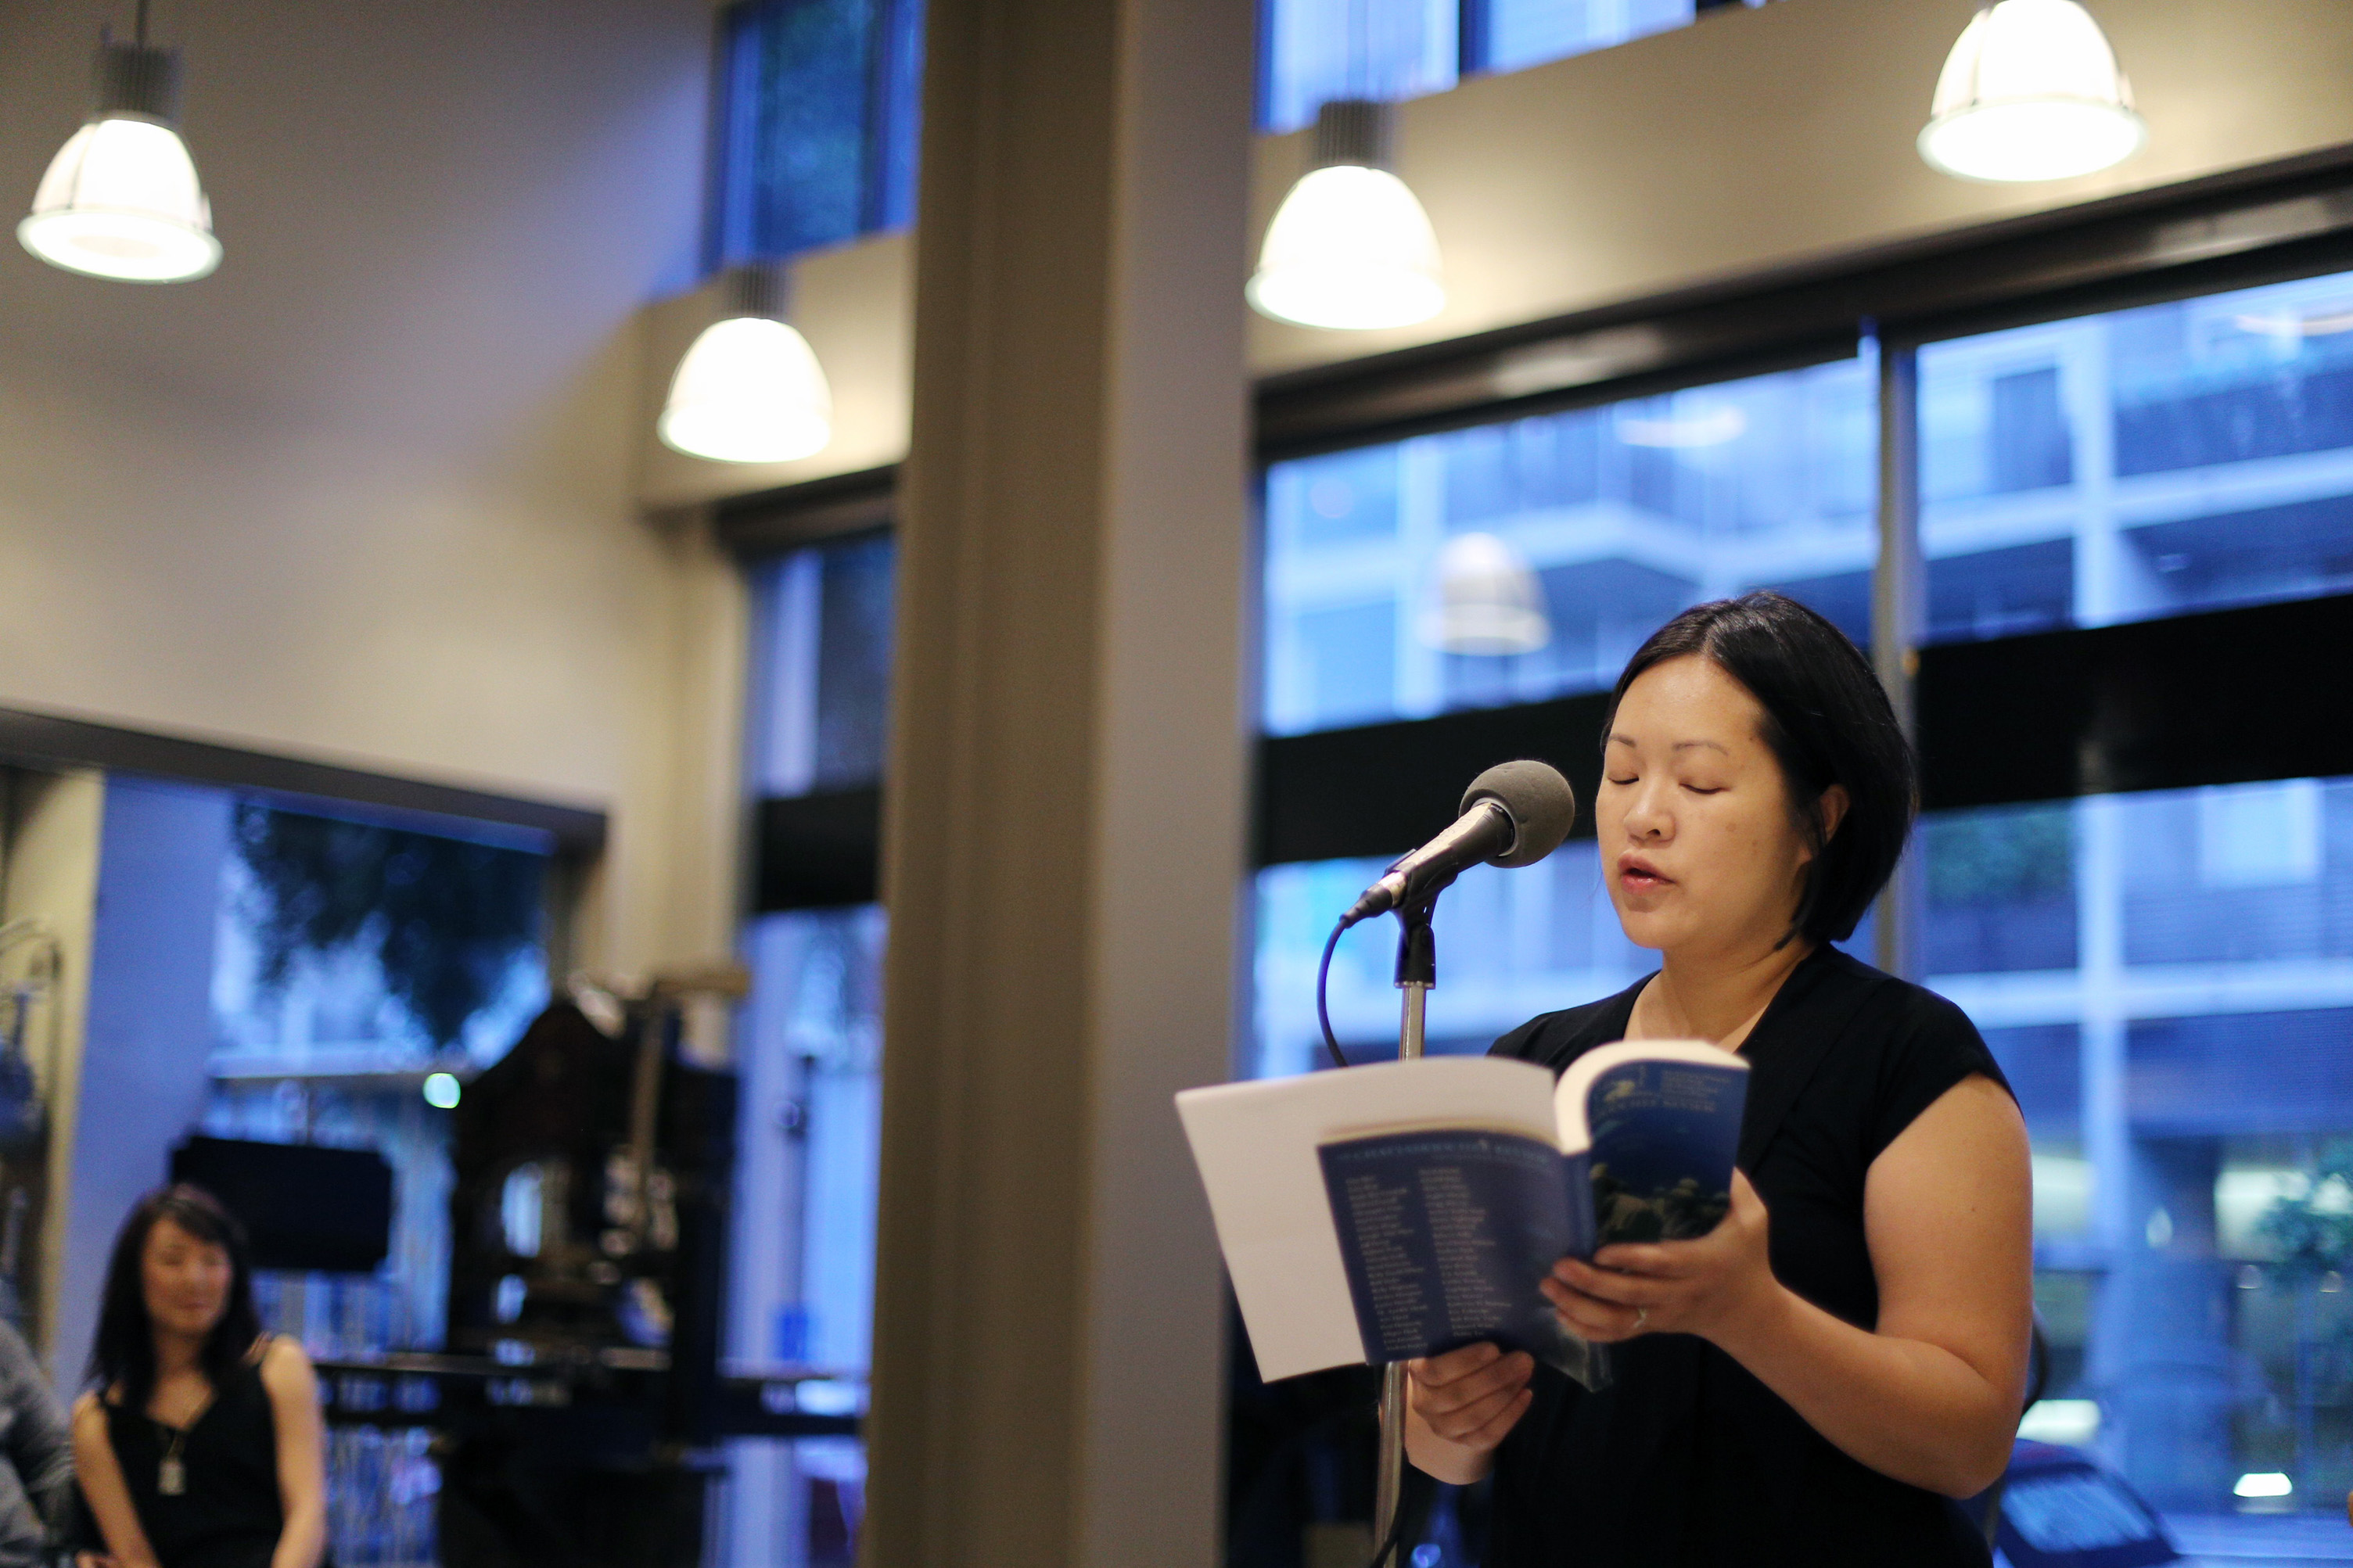 Debbie Yee reads at the American Bookbinders Museum after meditating on the image of the body as book.